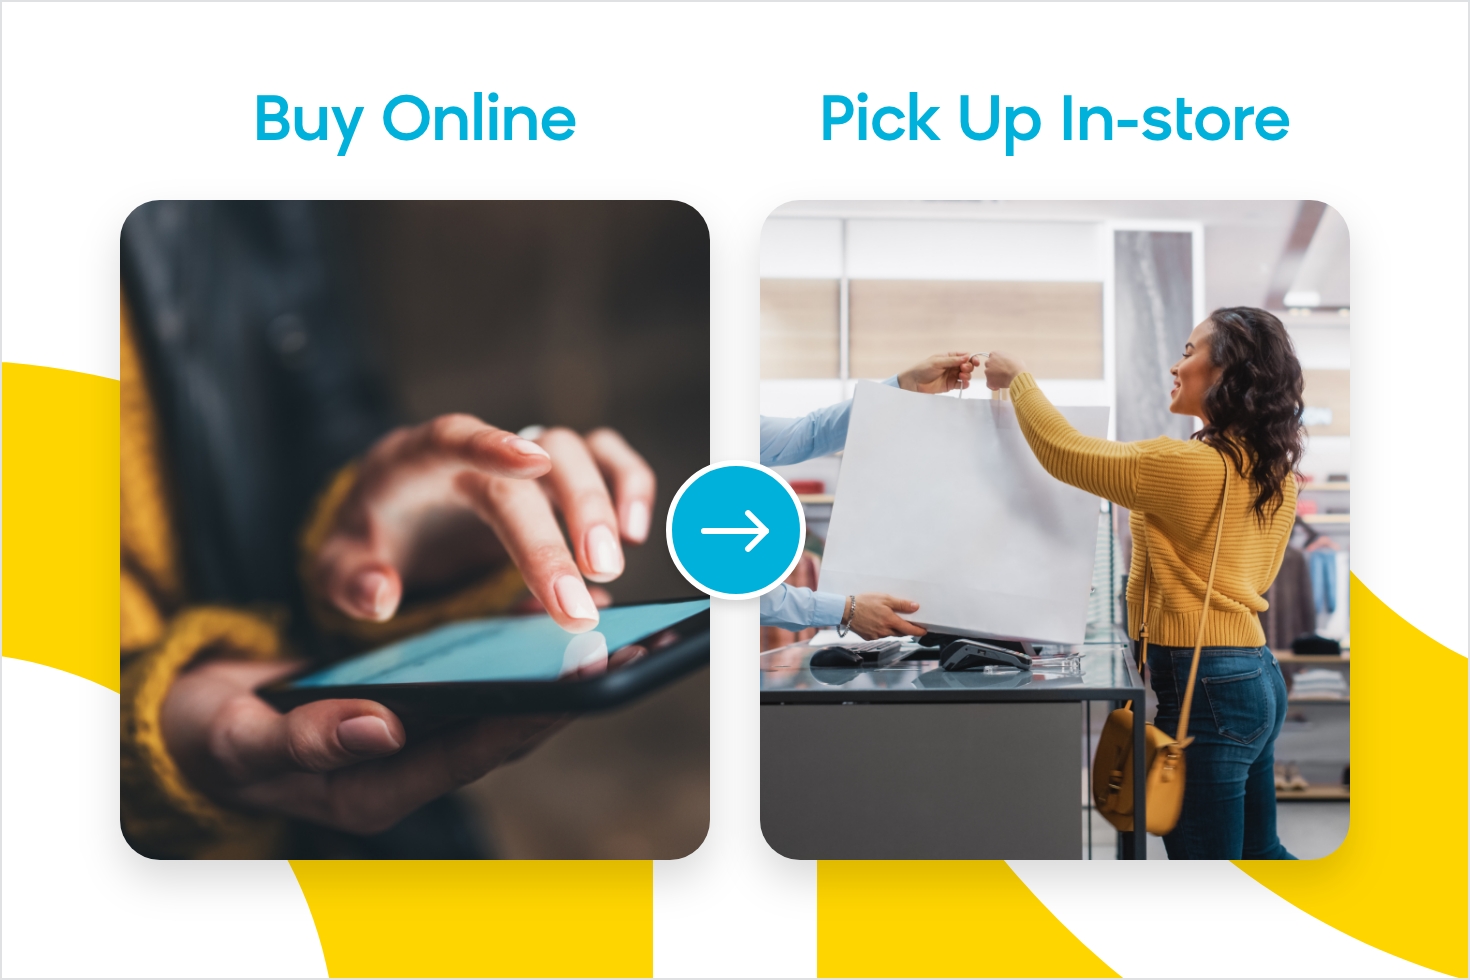 Buy online, pick up in-store (BOPIS) is a big omnichannel retail trend